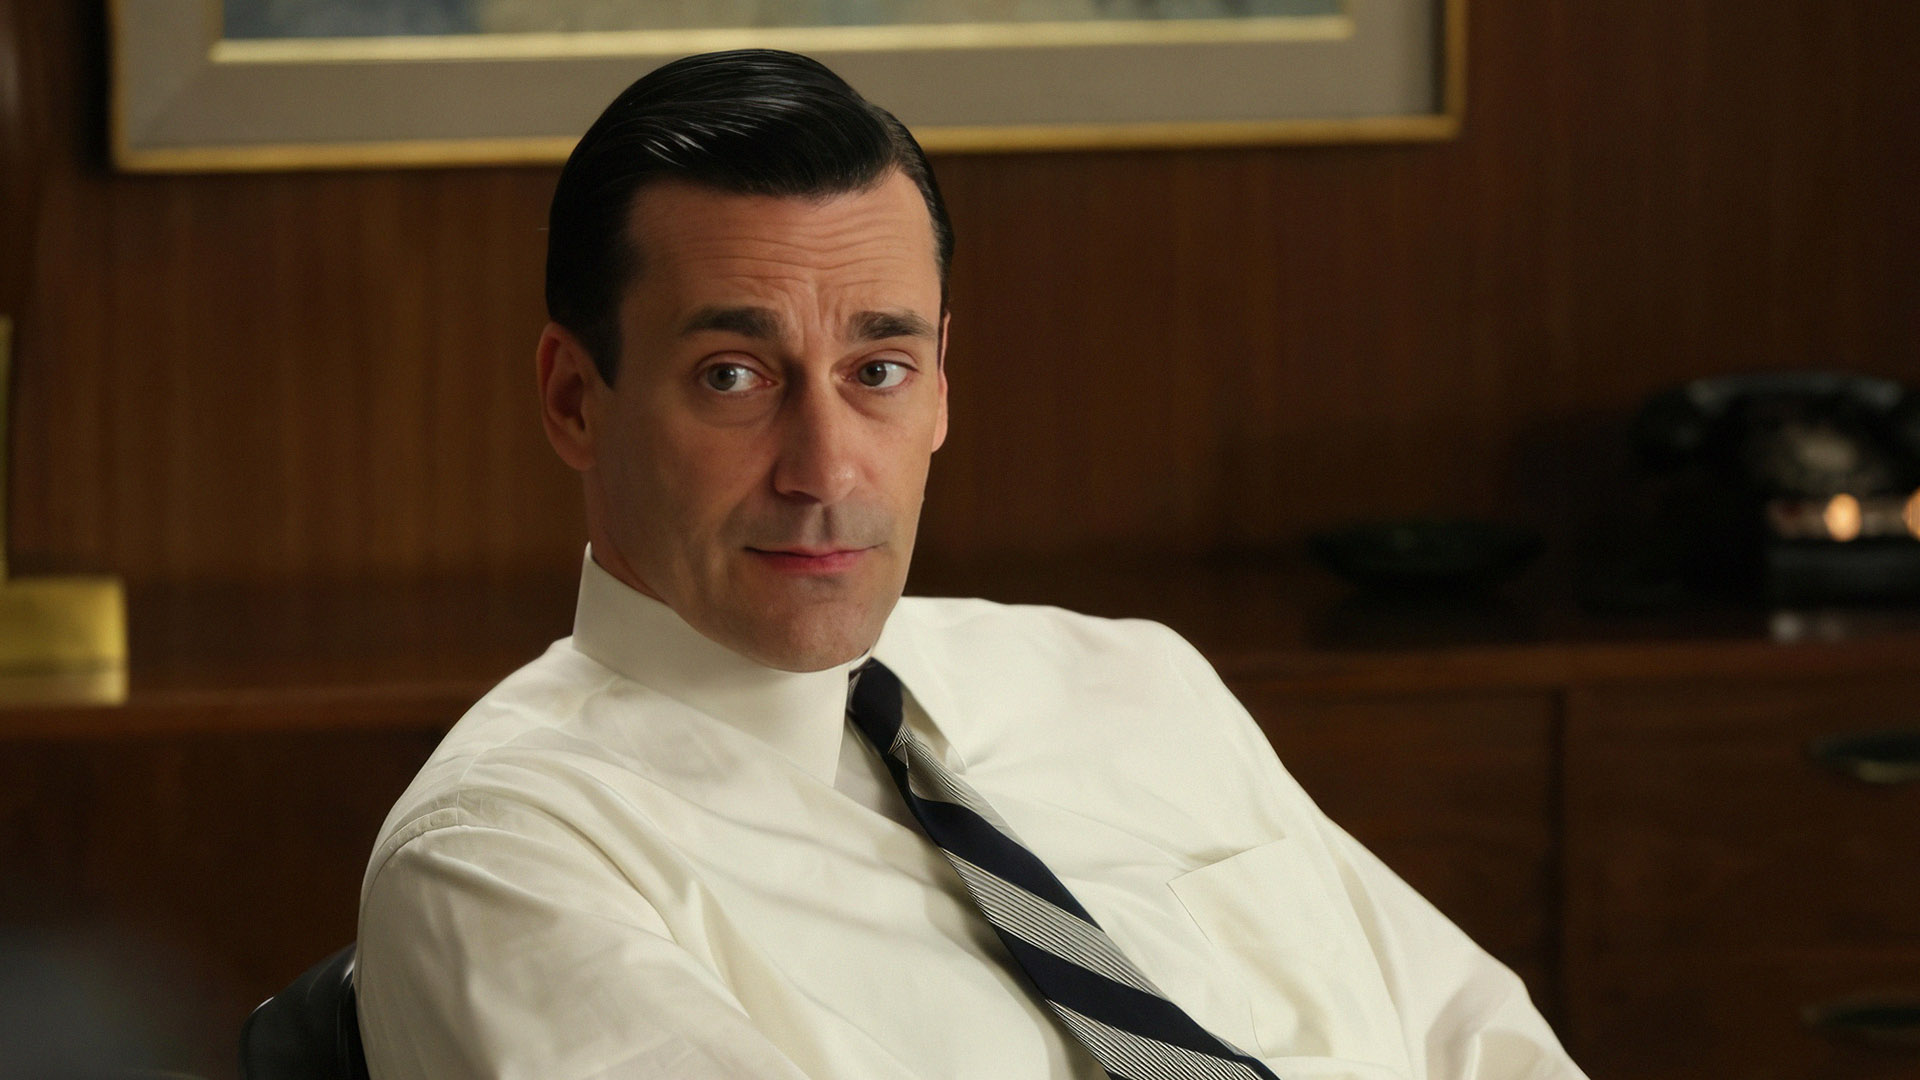 5 Celebrities You Totally Forgot Guest-Starred on Mad Men